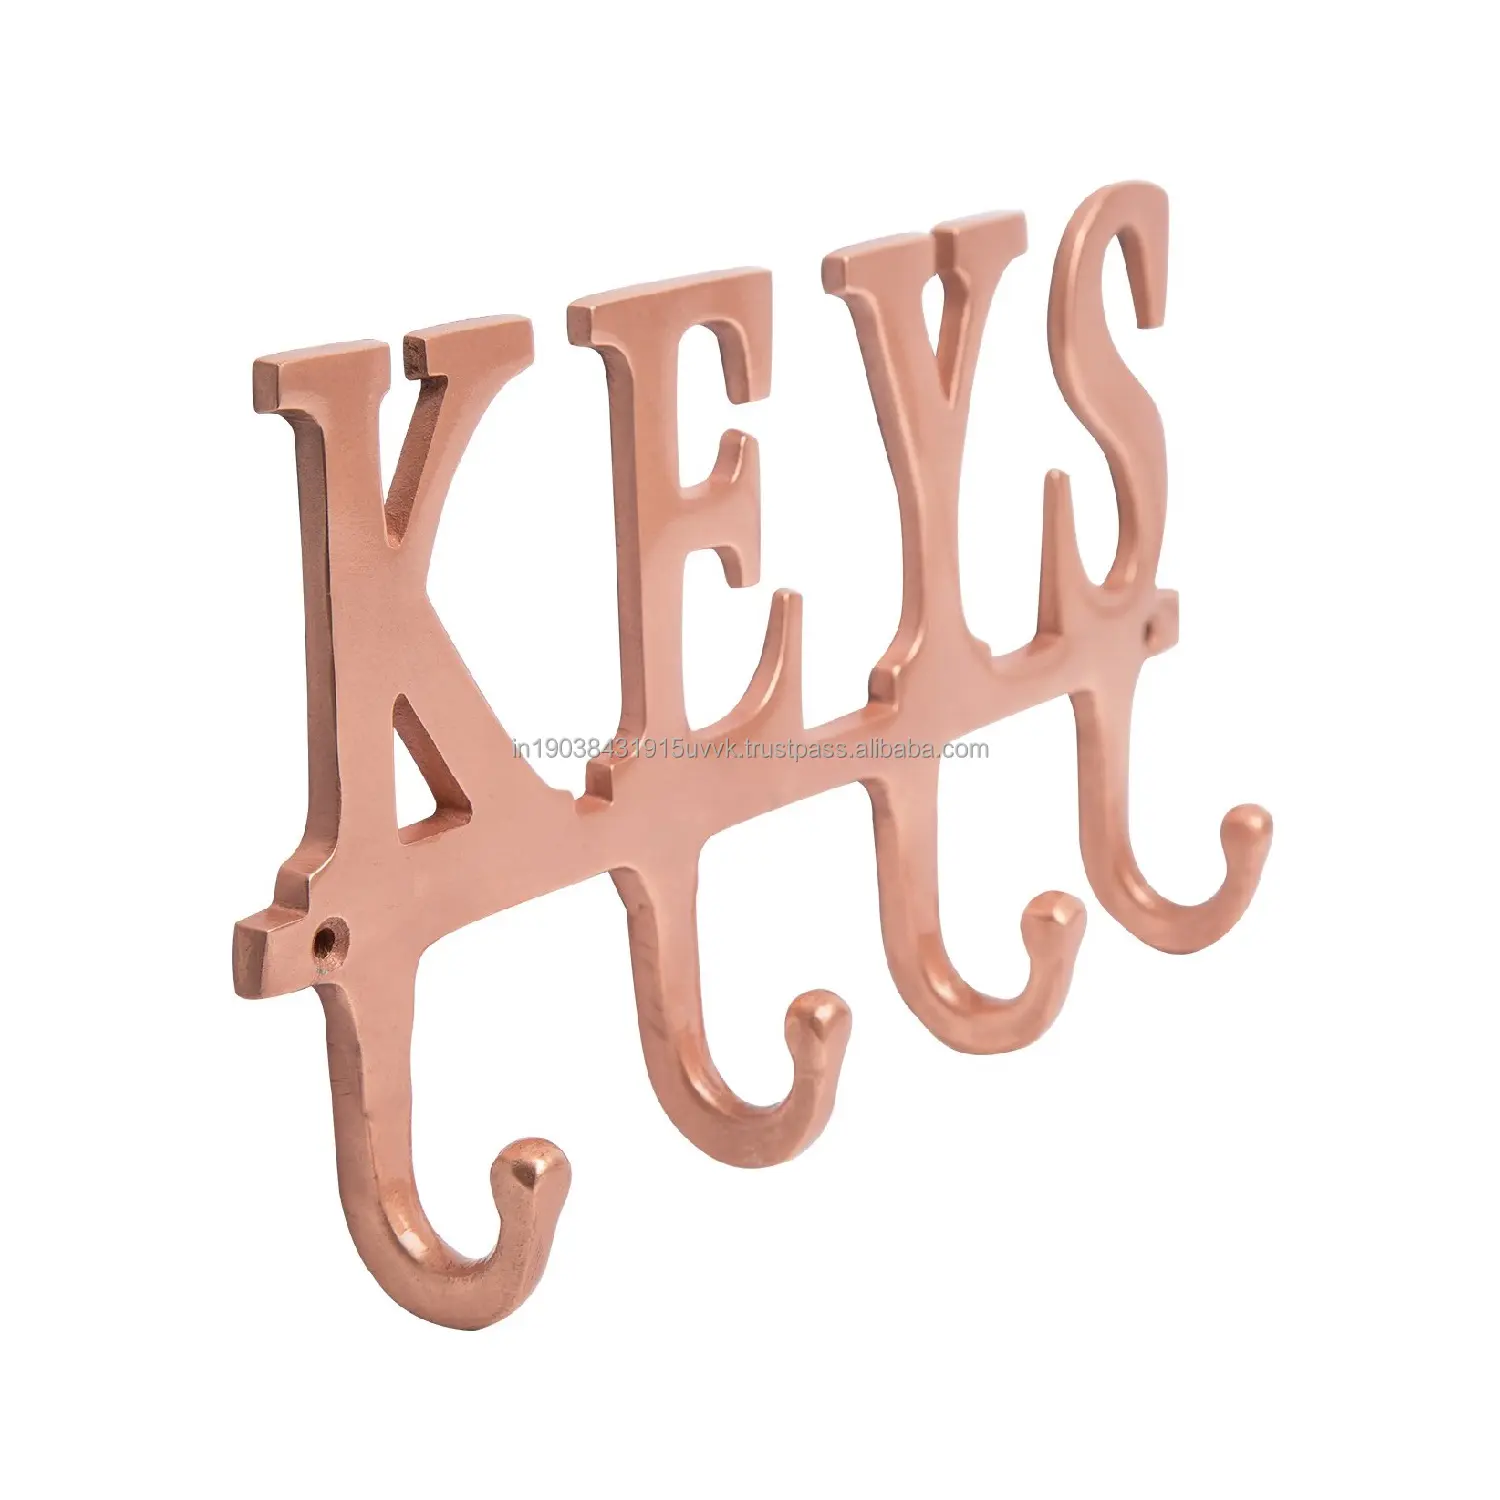 Rose Gold Plated Key words Casted Solid Aluminum Wall Hook For Decoration Metal Important Office Garage Cars Key Holder Hook